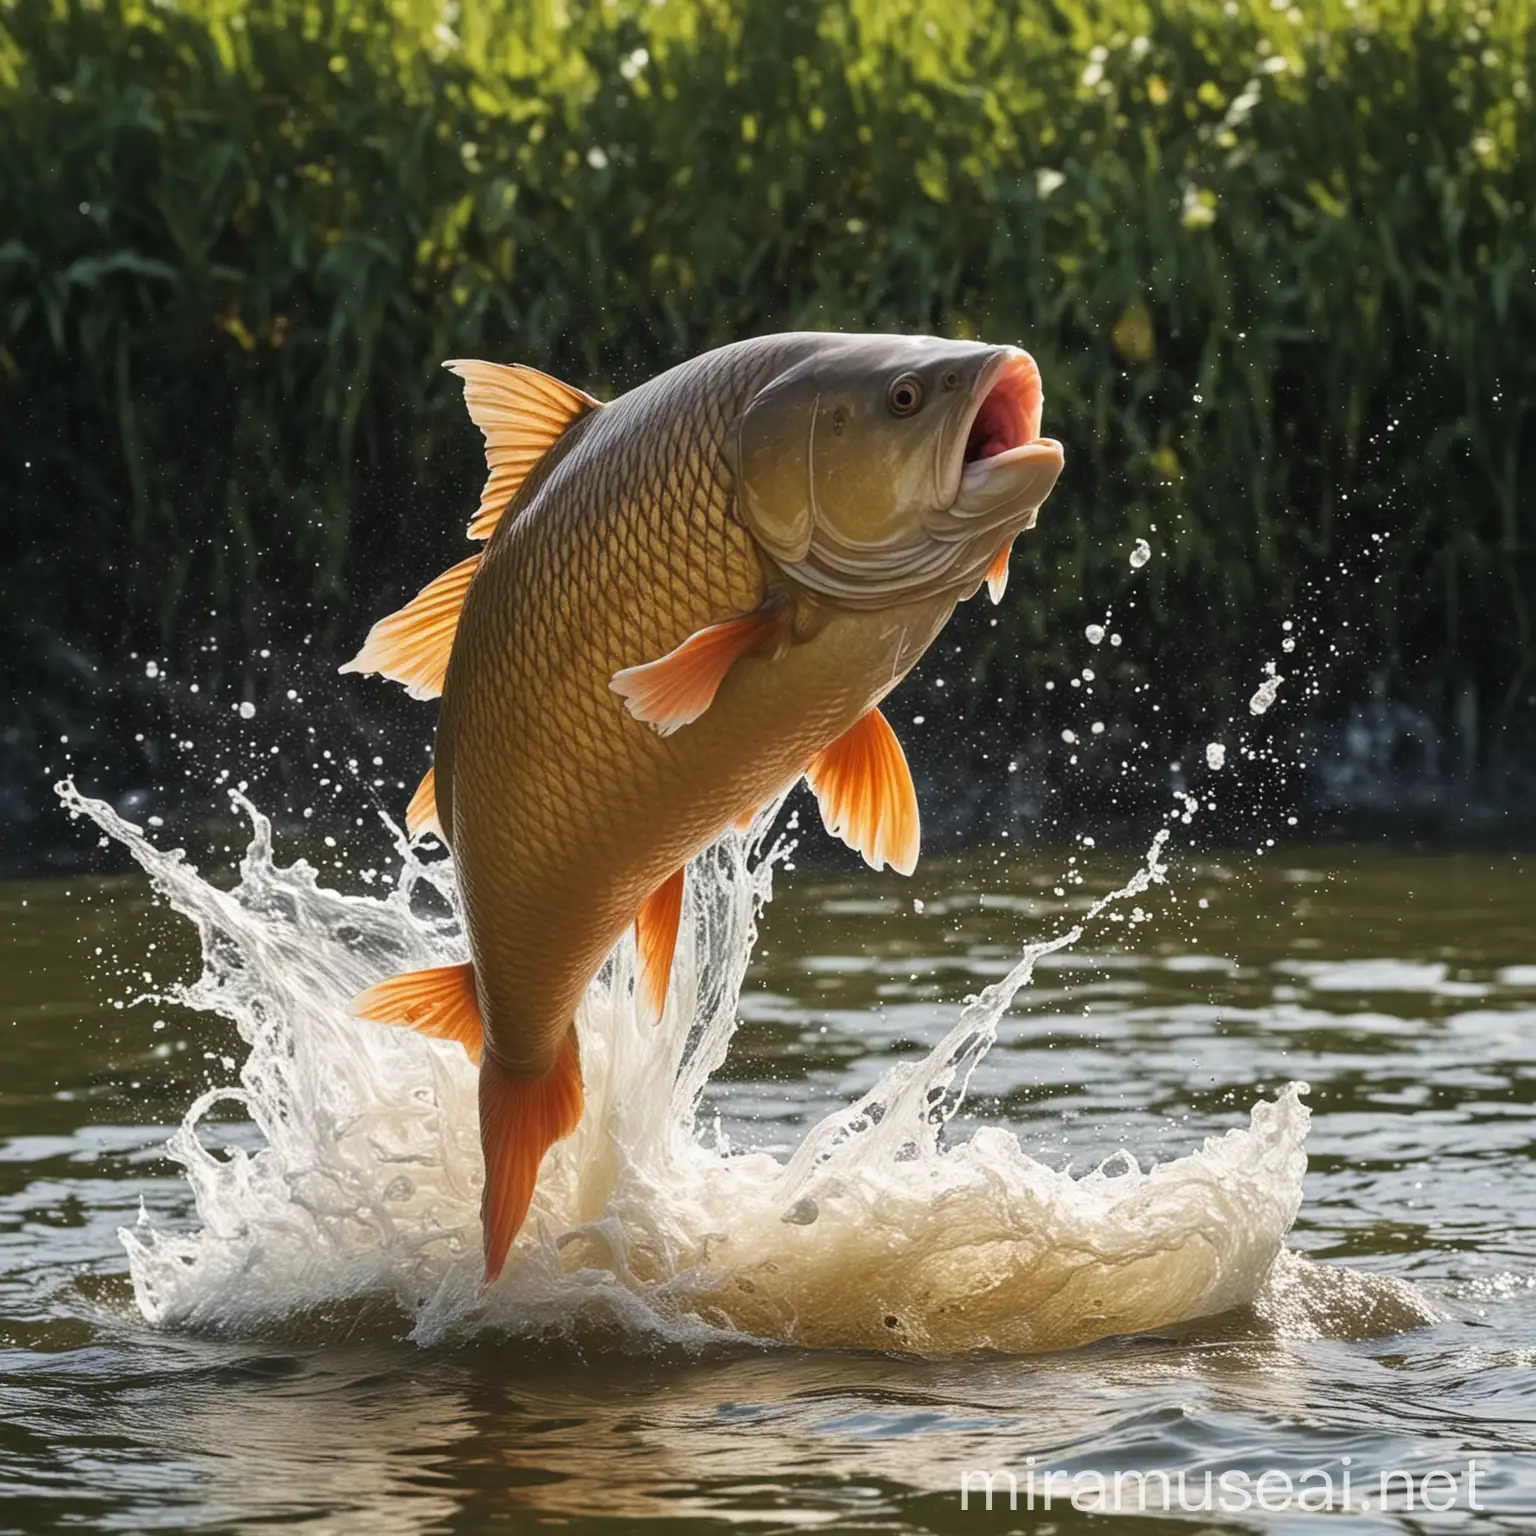 Energetic Carp Leaping from Rippling Waters